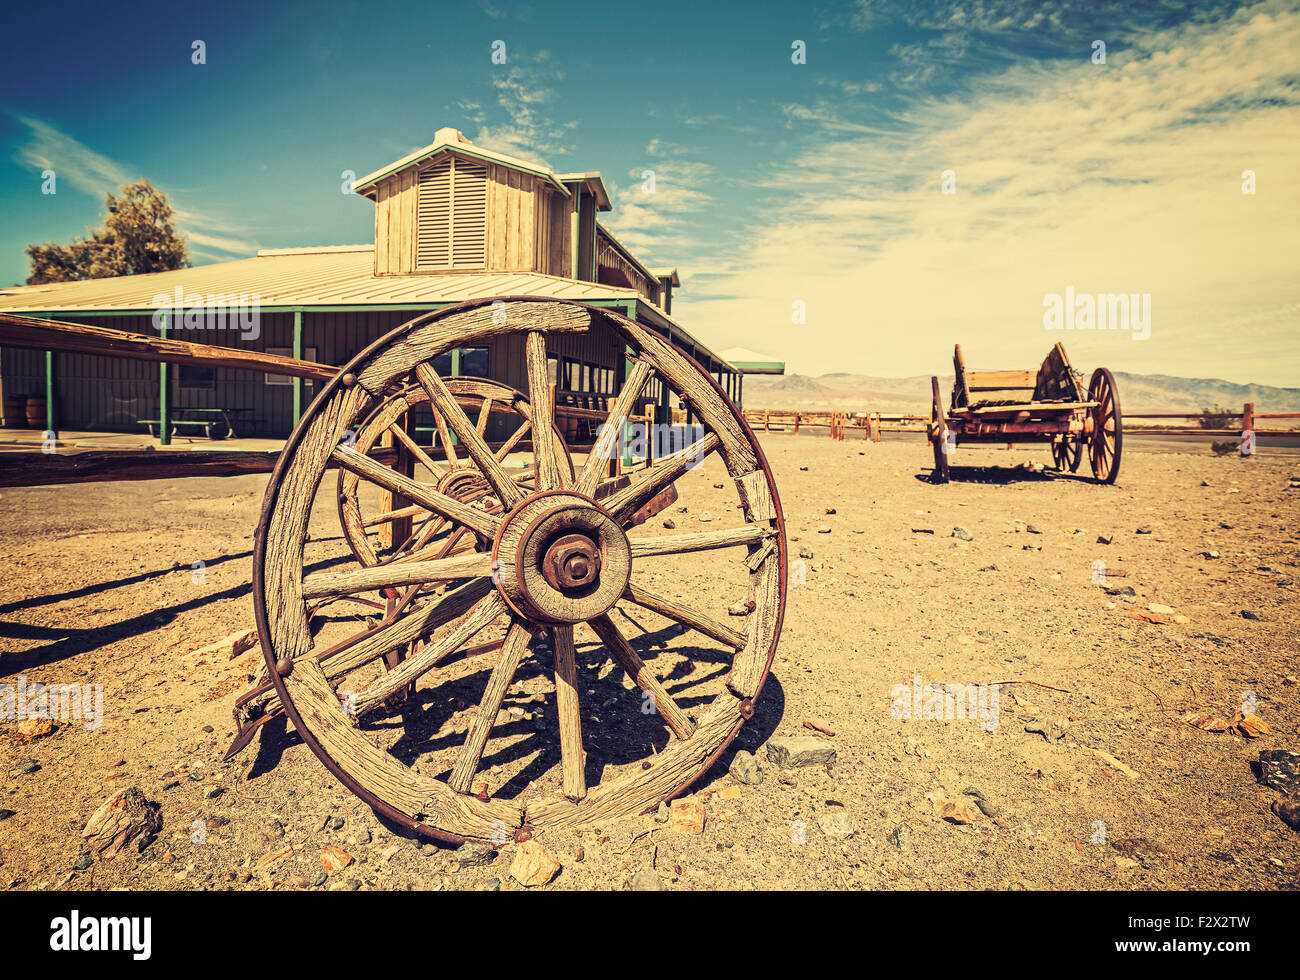 Retro style Western postcard with old carriages and saloon, Death Valley, USA. Stock Photo